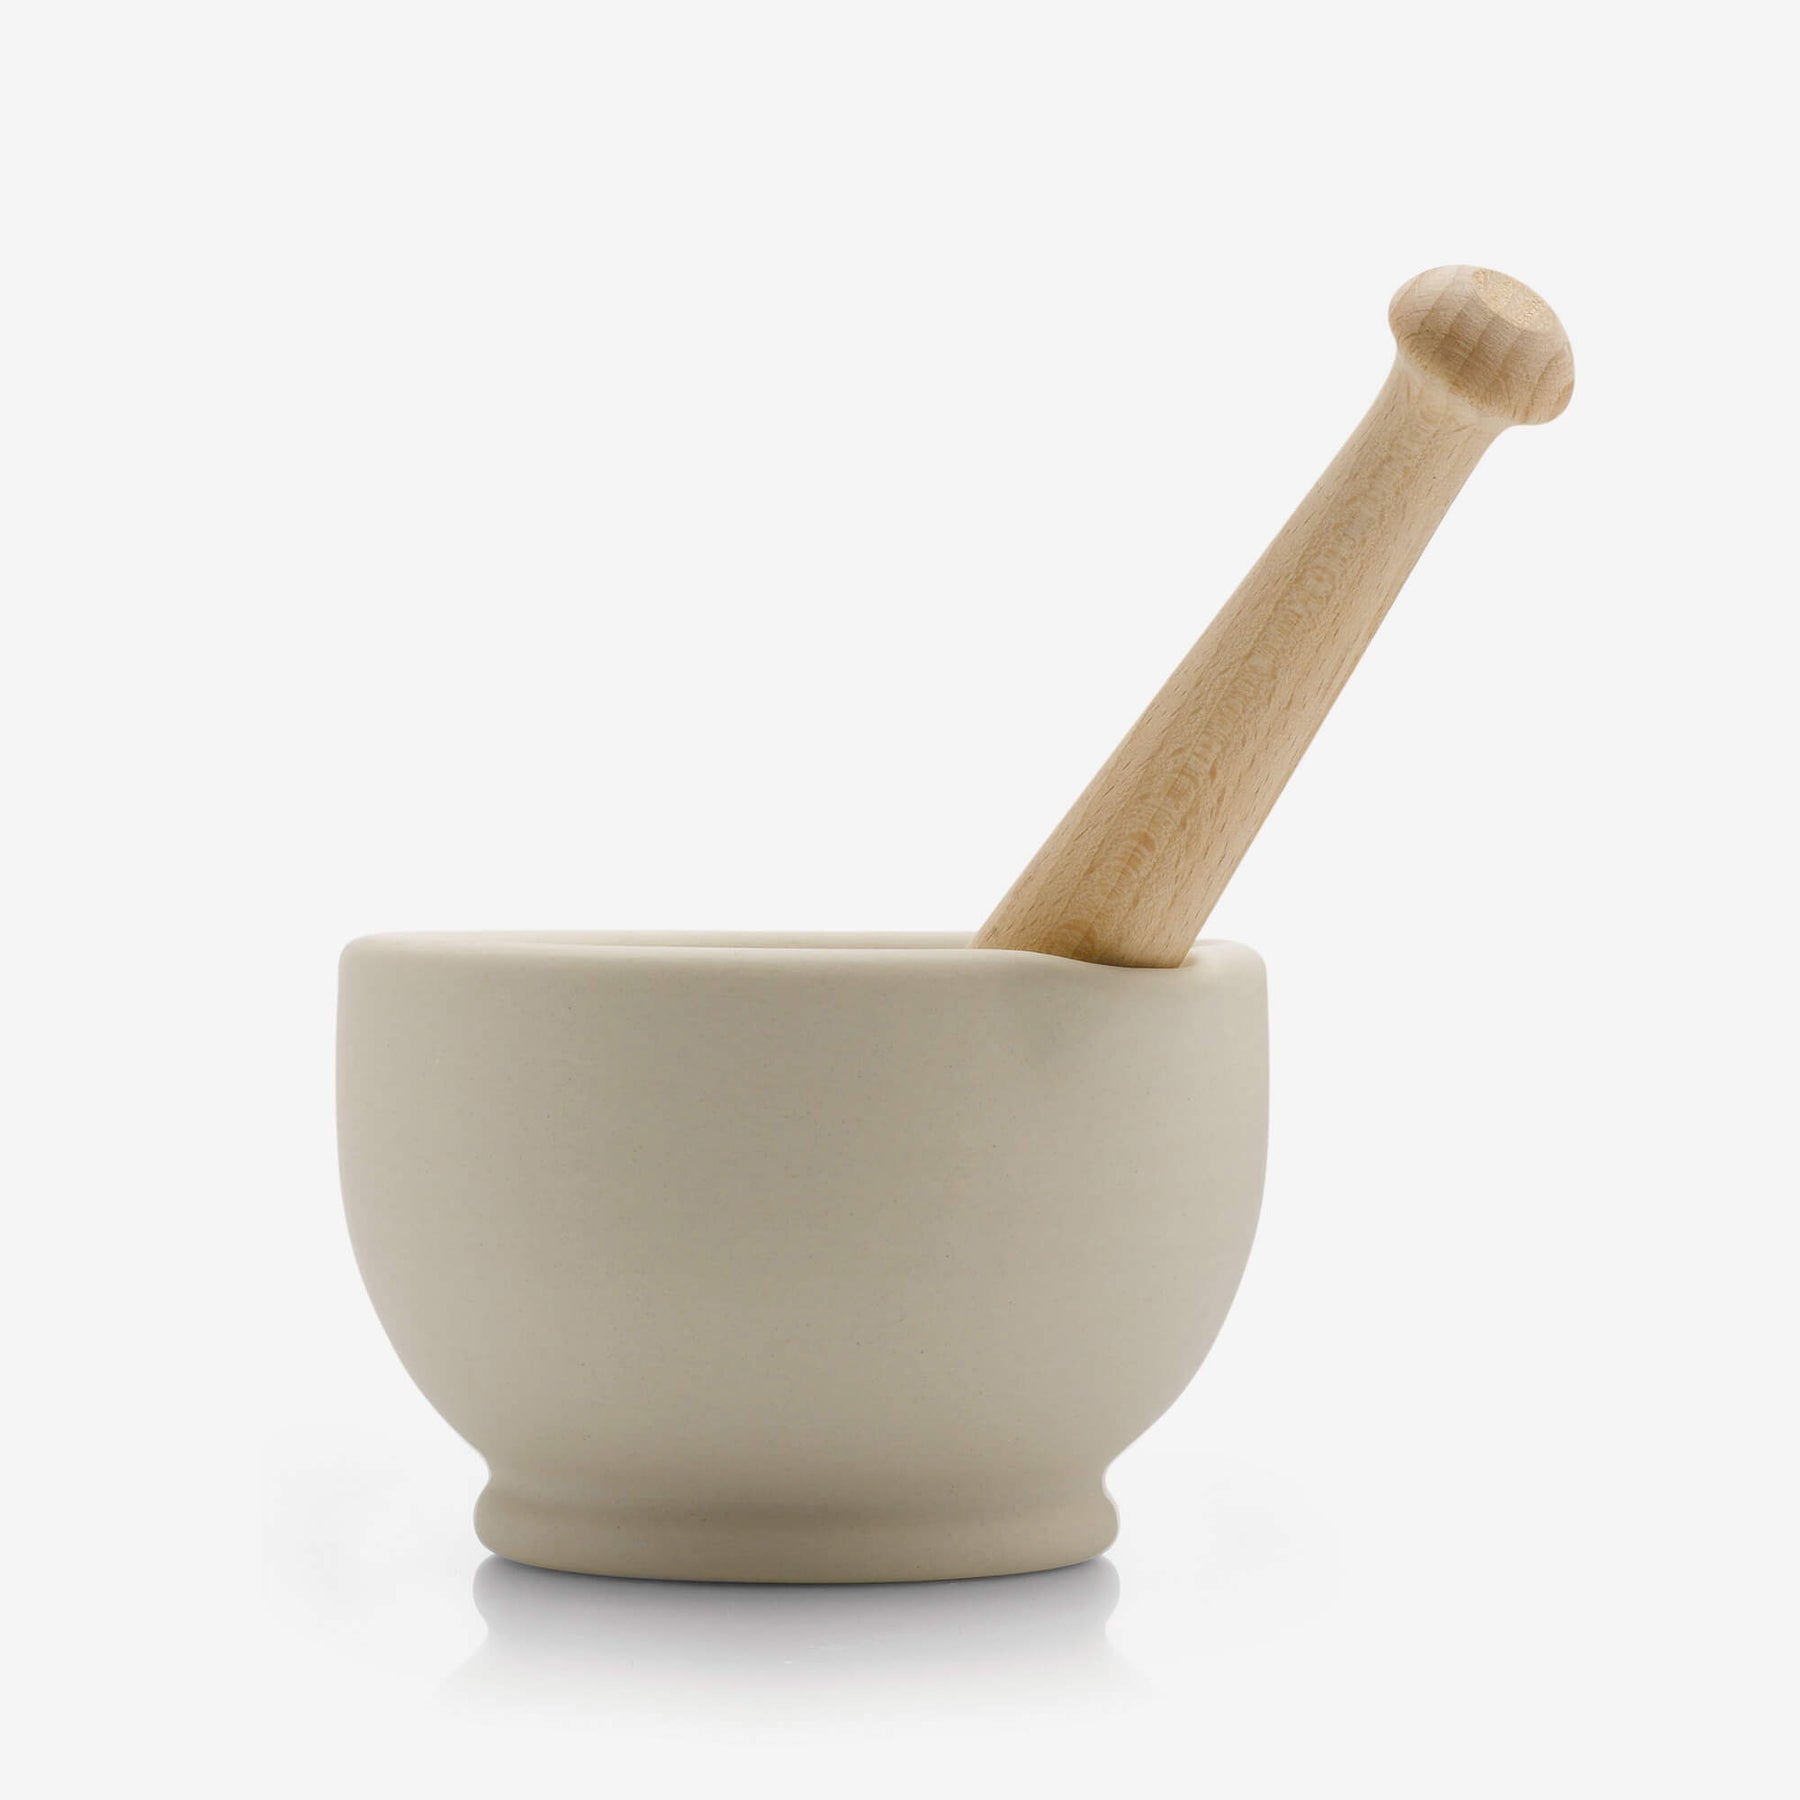 Stone Mortar & Pestle with Wooden Handle, Boxed, Available in 6 Sizes